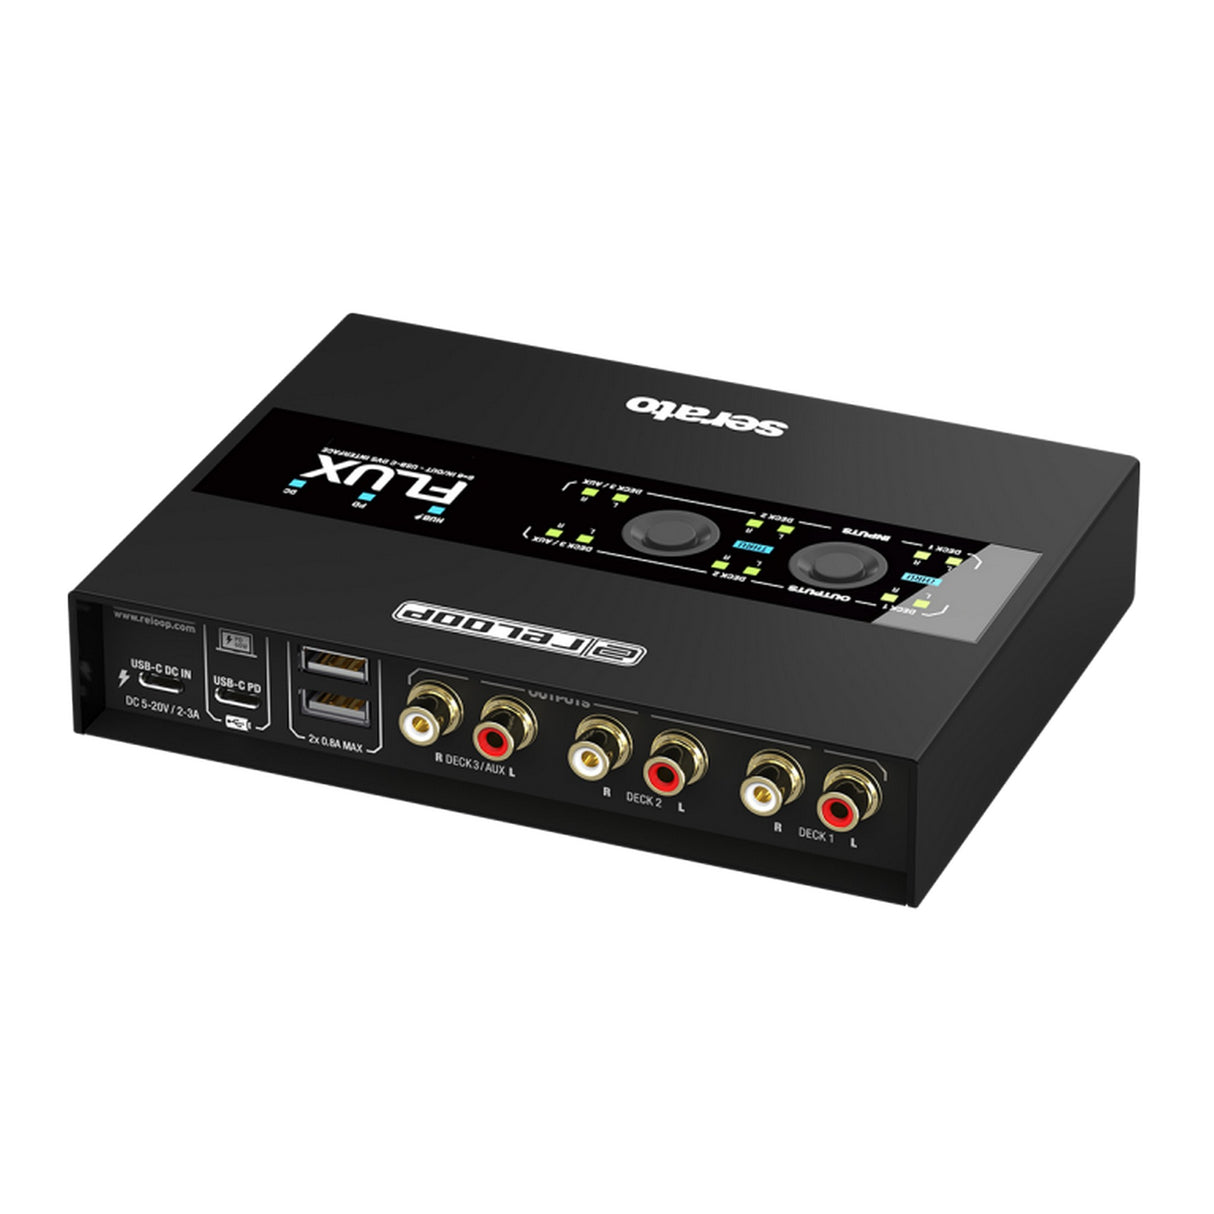 Reloop FLUX 6x6 In/Out USB-C DVS Interface for Serato DJ Pro